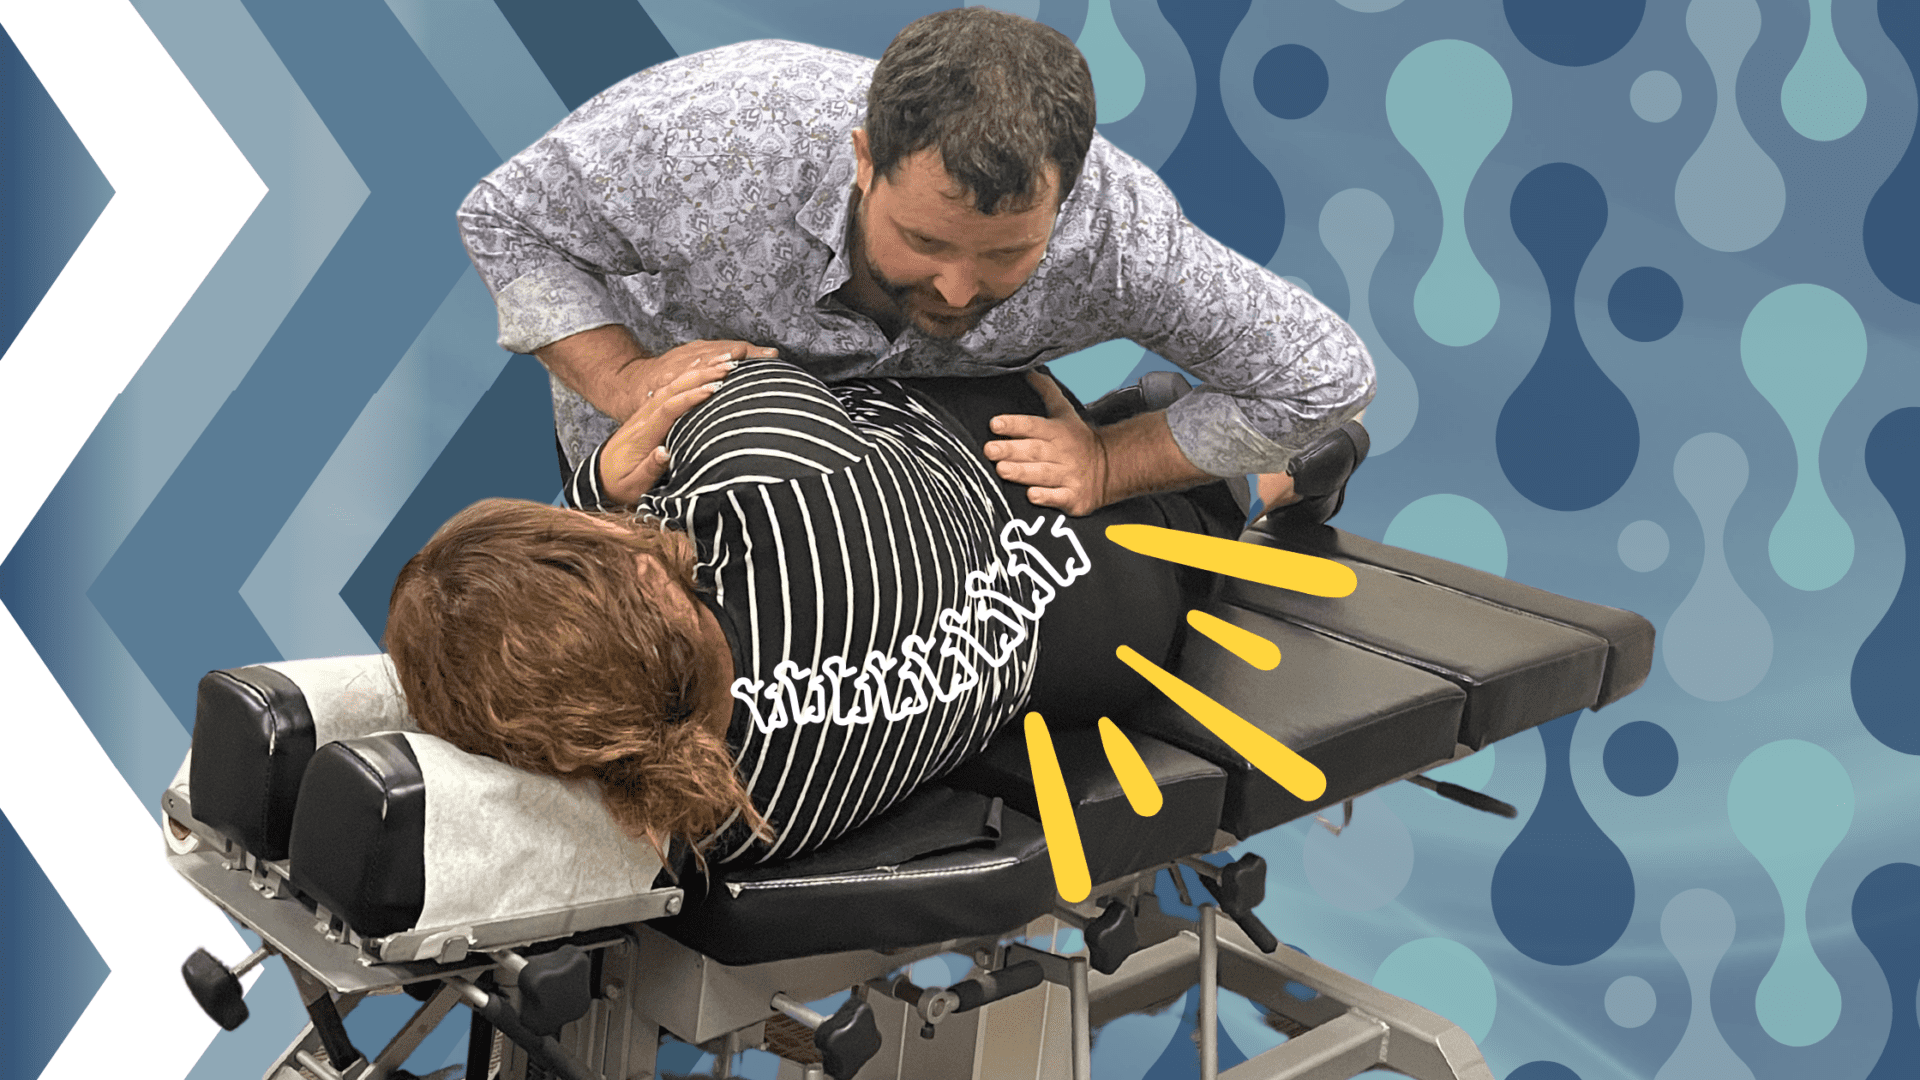 Chiropractor performing an adjustment on a patient, illustrating the process and benefits of chiropractic care.